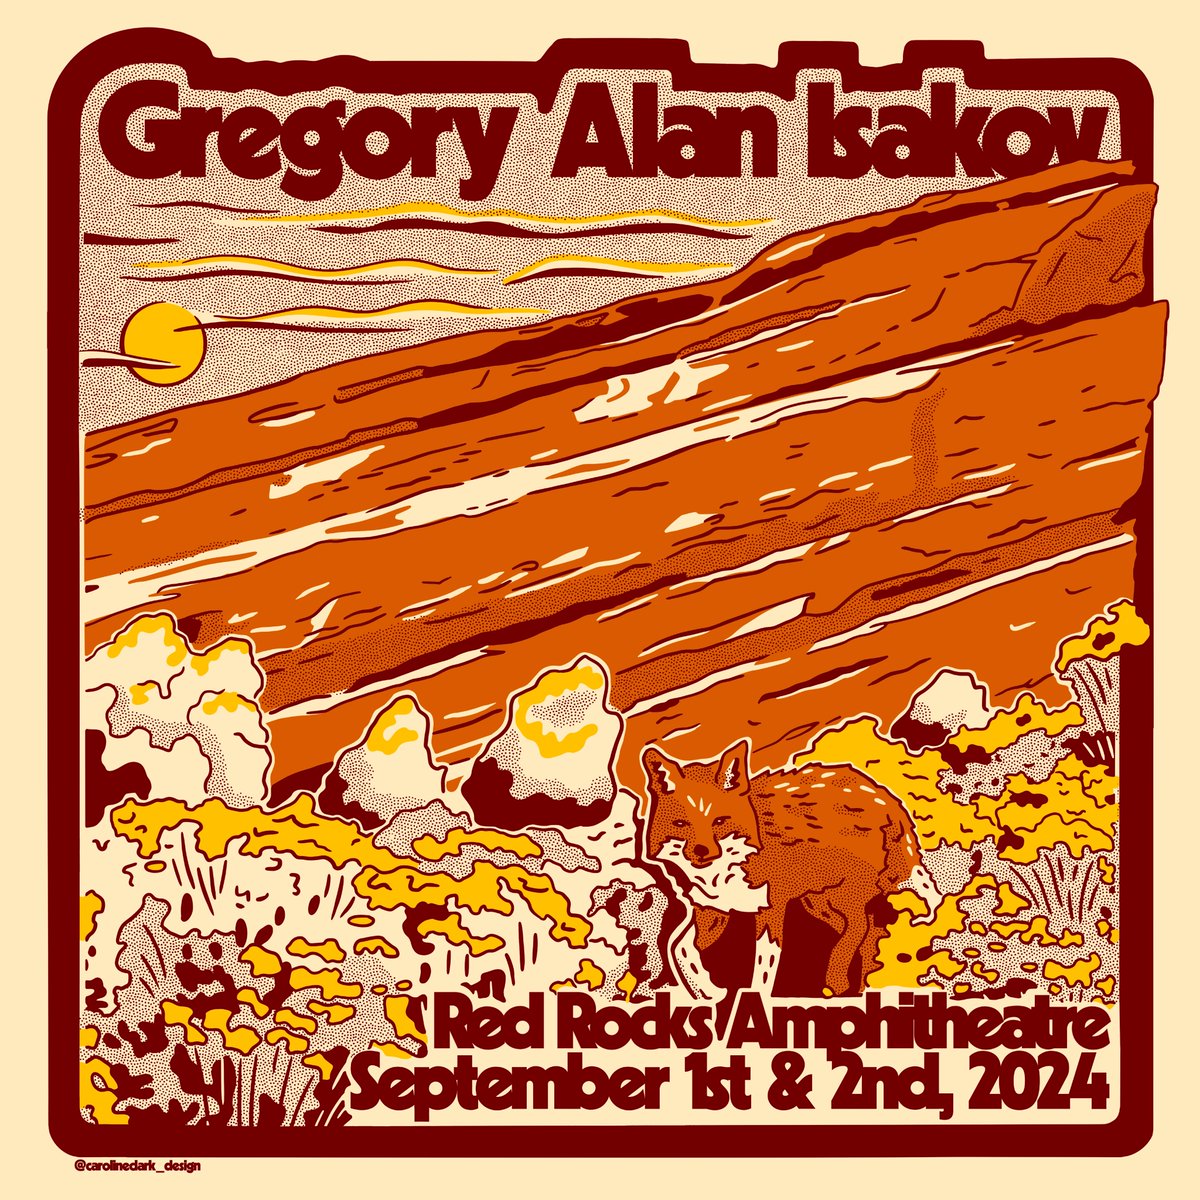 announcing two nights at our beloved Red Rocks Amphitheatre September 1st & 2nd next year. tickets go on sale this Friday. to register for Thursday's pre-sale: psale.co/G7wAYbo artwork by Caroline Clark @RedRocksCO @AEGPresentsRM